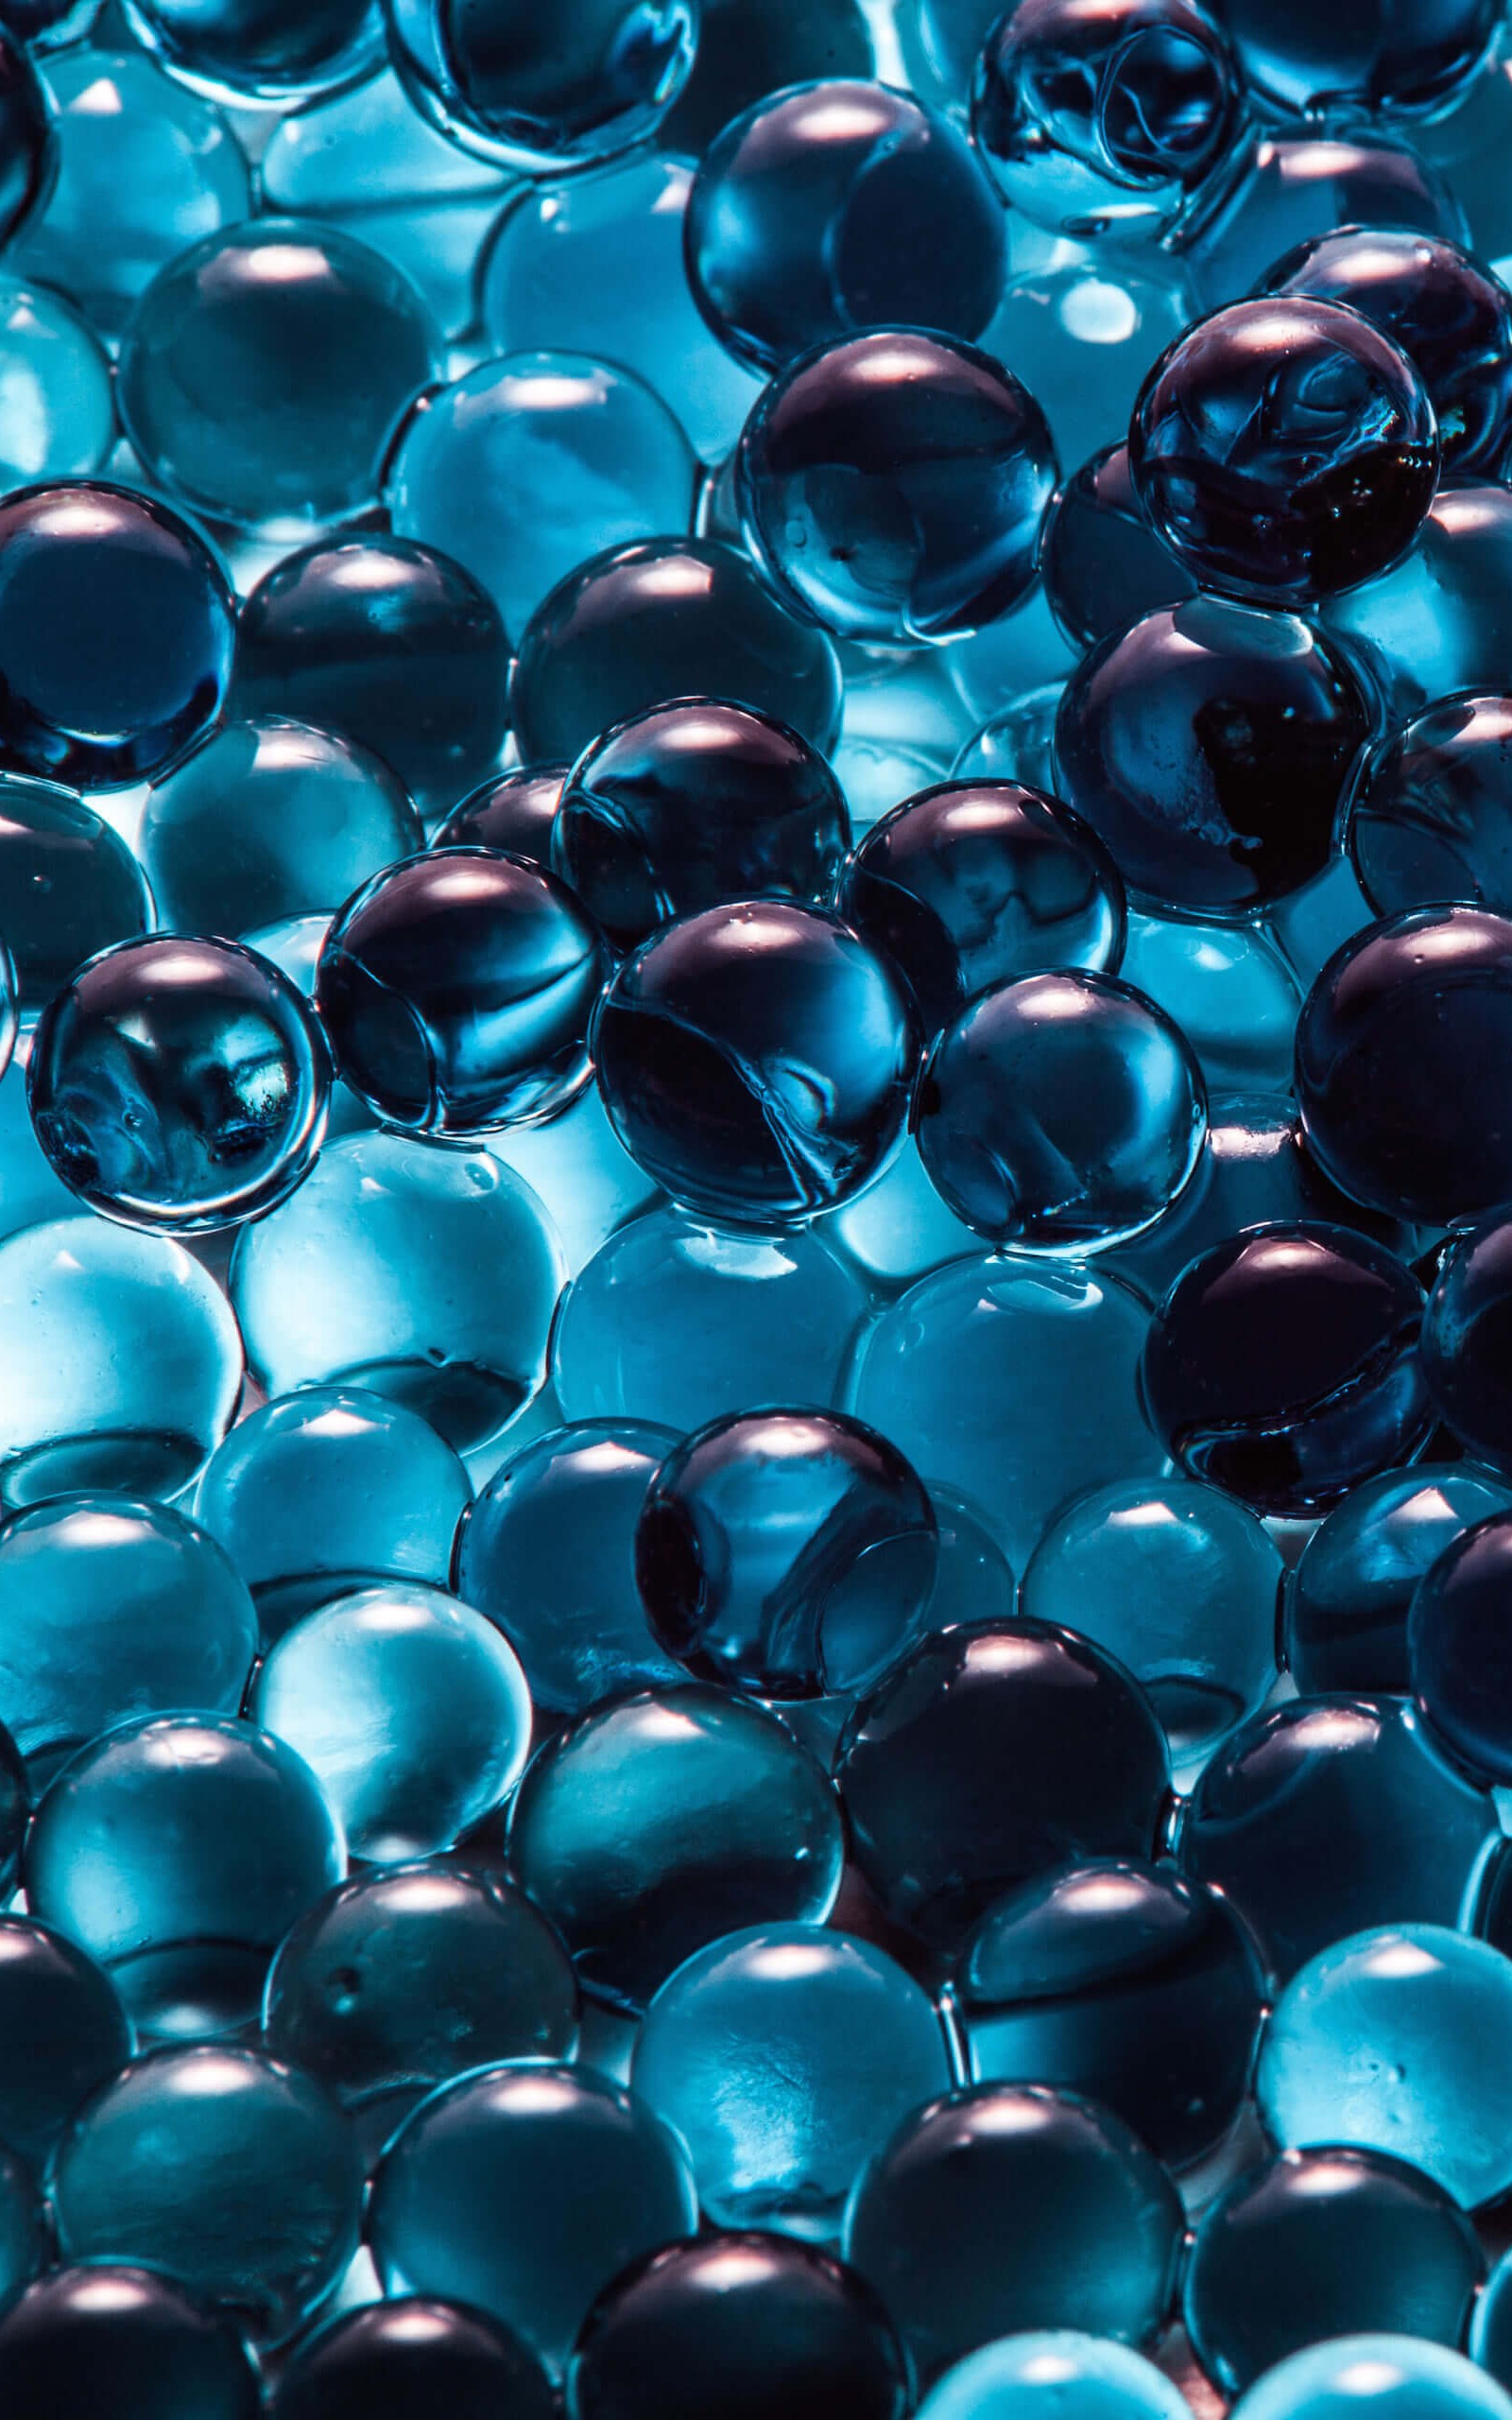 Water Beads Wallpaper For Amazon Kindle Fire HDx